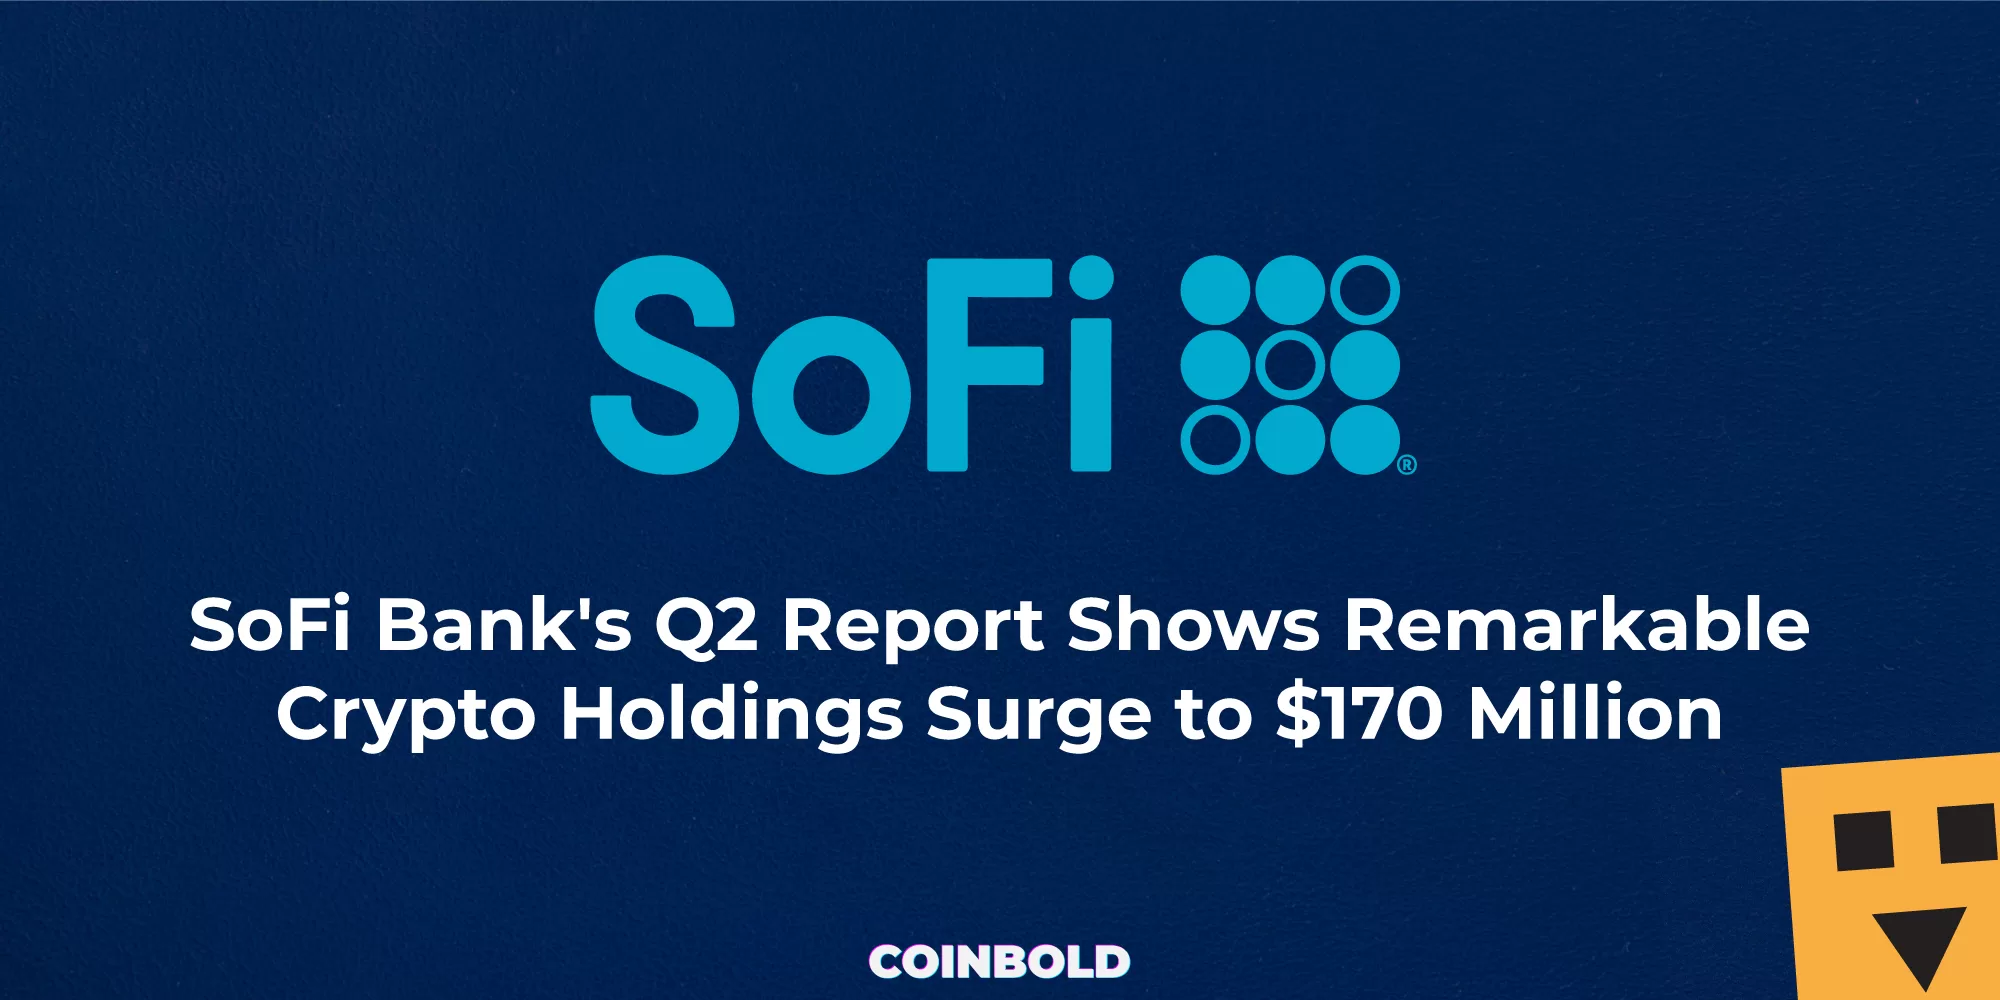 SoFi Bank's Q2 Report Shows Remarkable Crypto Holdings Surge to $170 Million